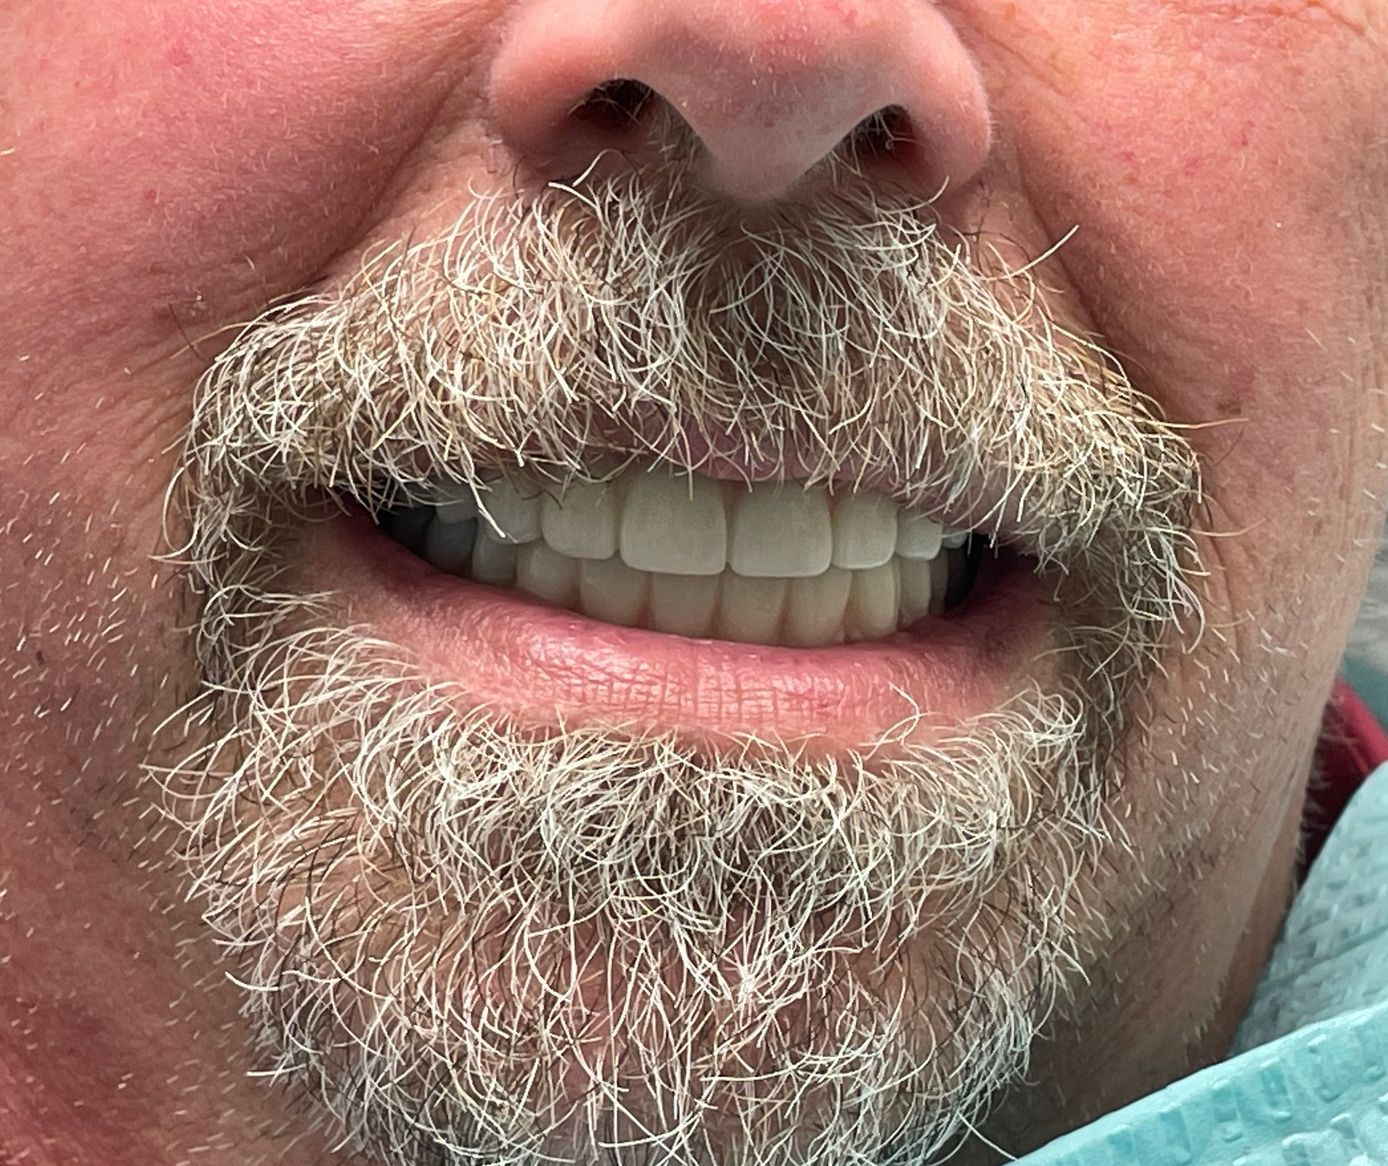 a close up of a man 's mouth with a beard | All on x | Full mouth restoration | Before and After Dental Treatment | Barclay Family Dental | Best Dentist For Family Dentistry, Dental Implants, and Cosmetic Dentistry in Cherry Hill, NJ